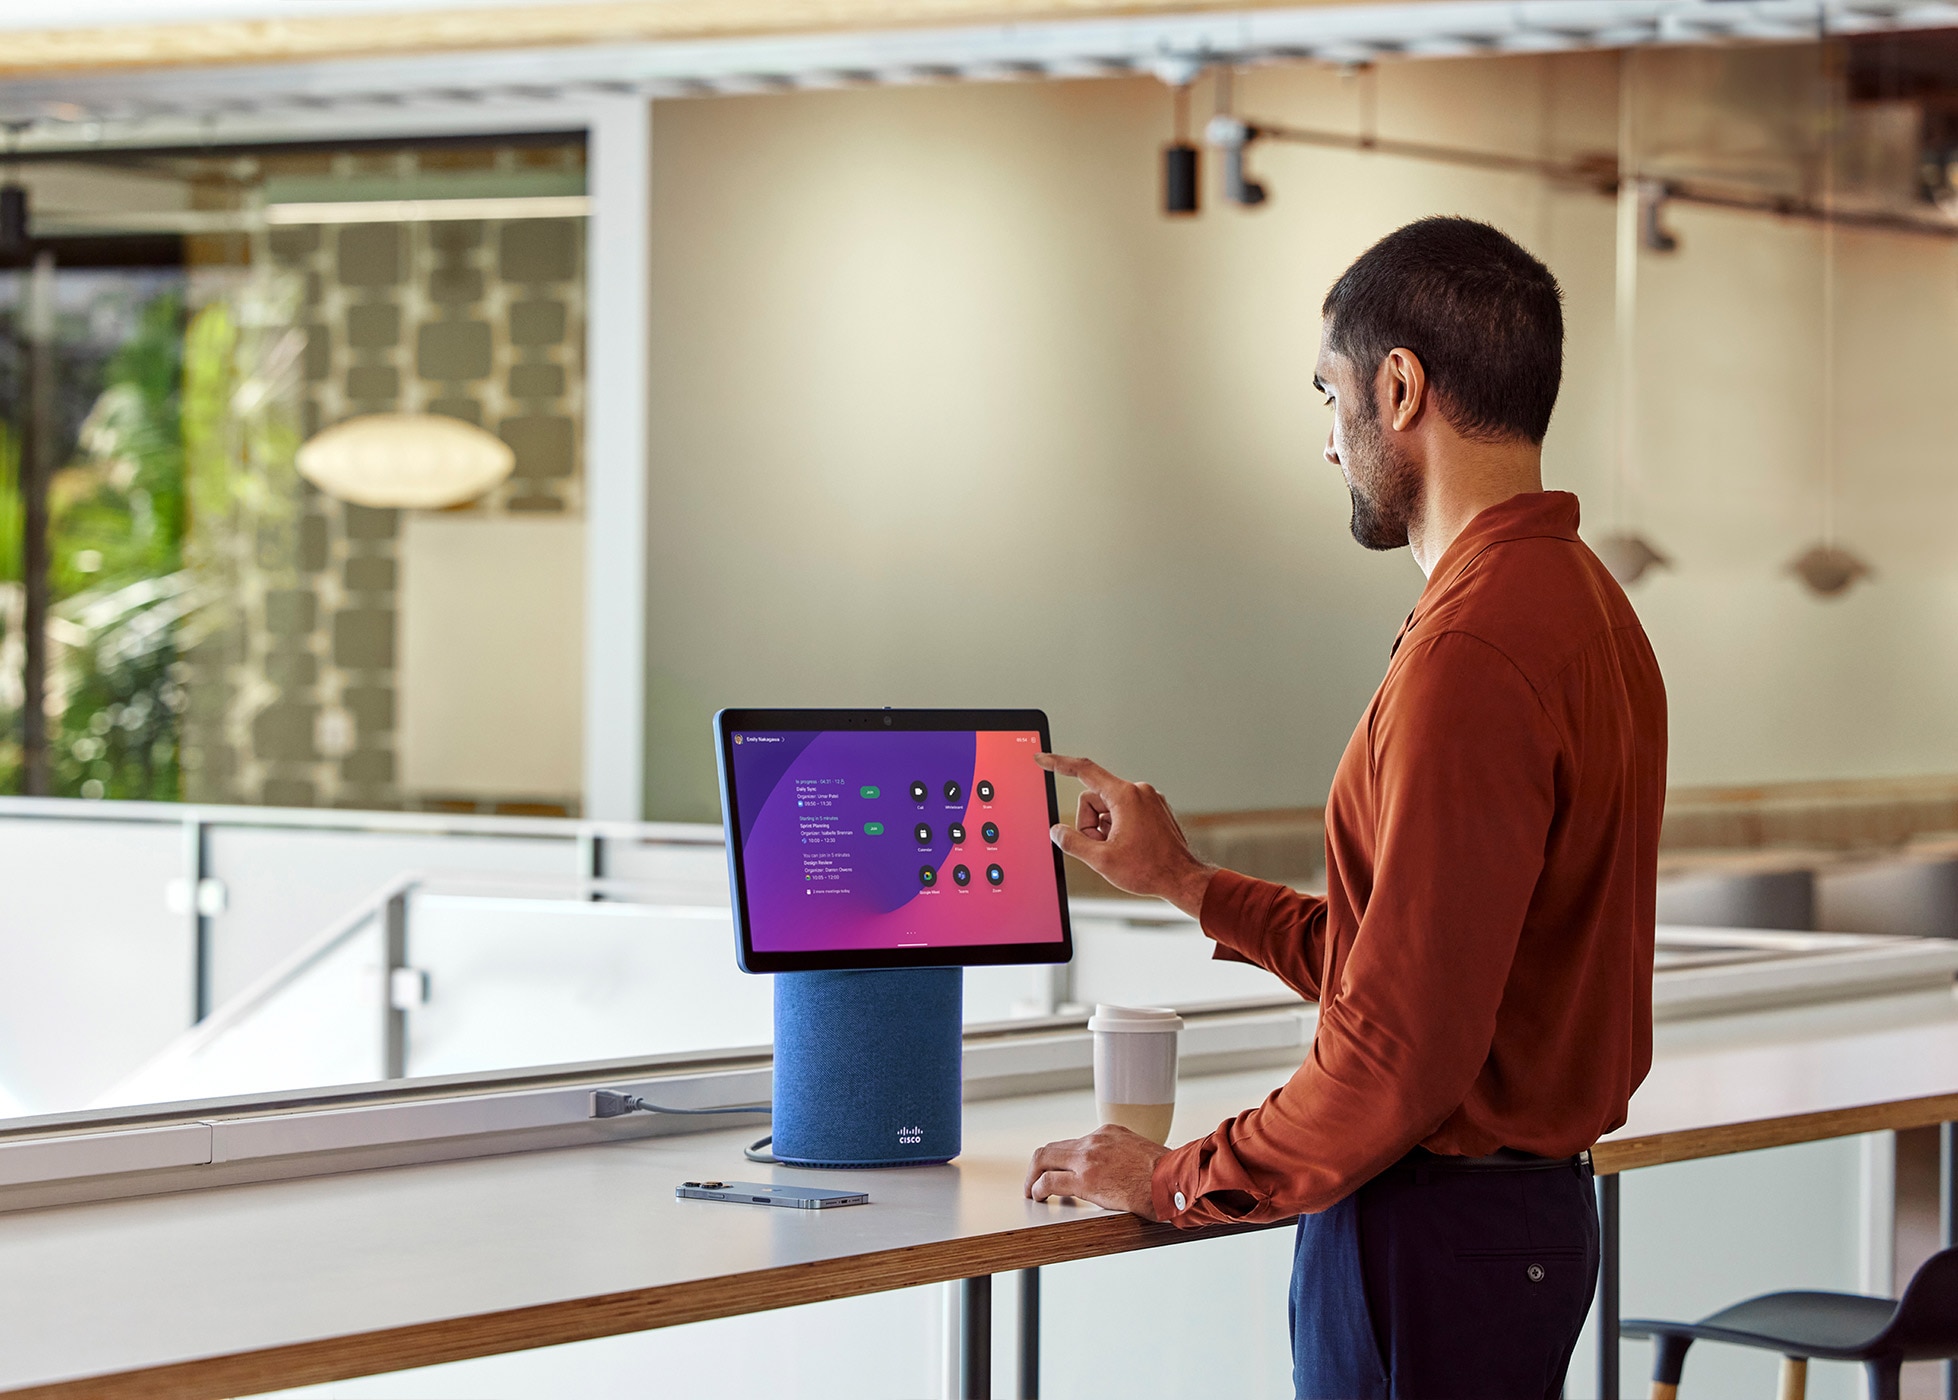 Person taps Webex Desk Mini’s touch screen to join Zoom meeting. Screen shows apps like Google Meet, Microsoft Teams, and Zoom